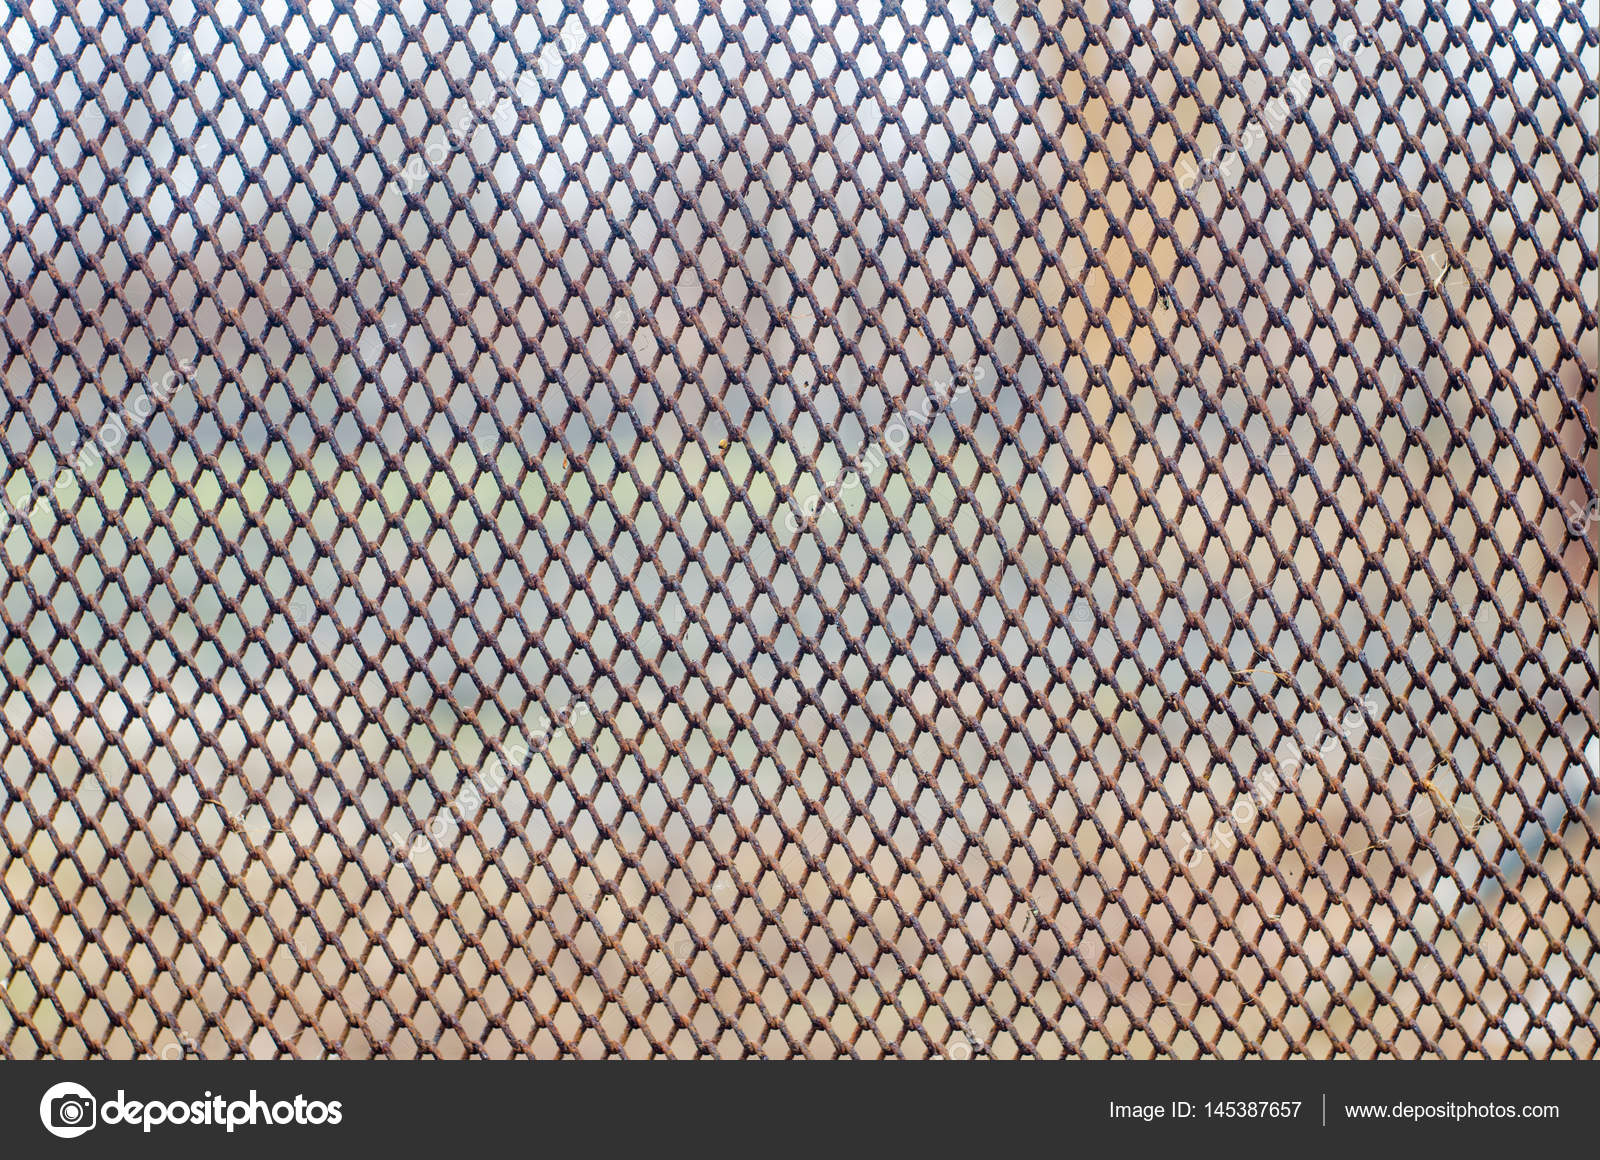 3d like mesh honeycomb white texture Royalty Free Vector